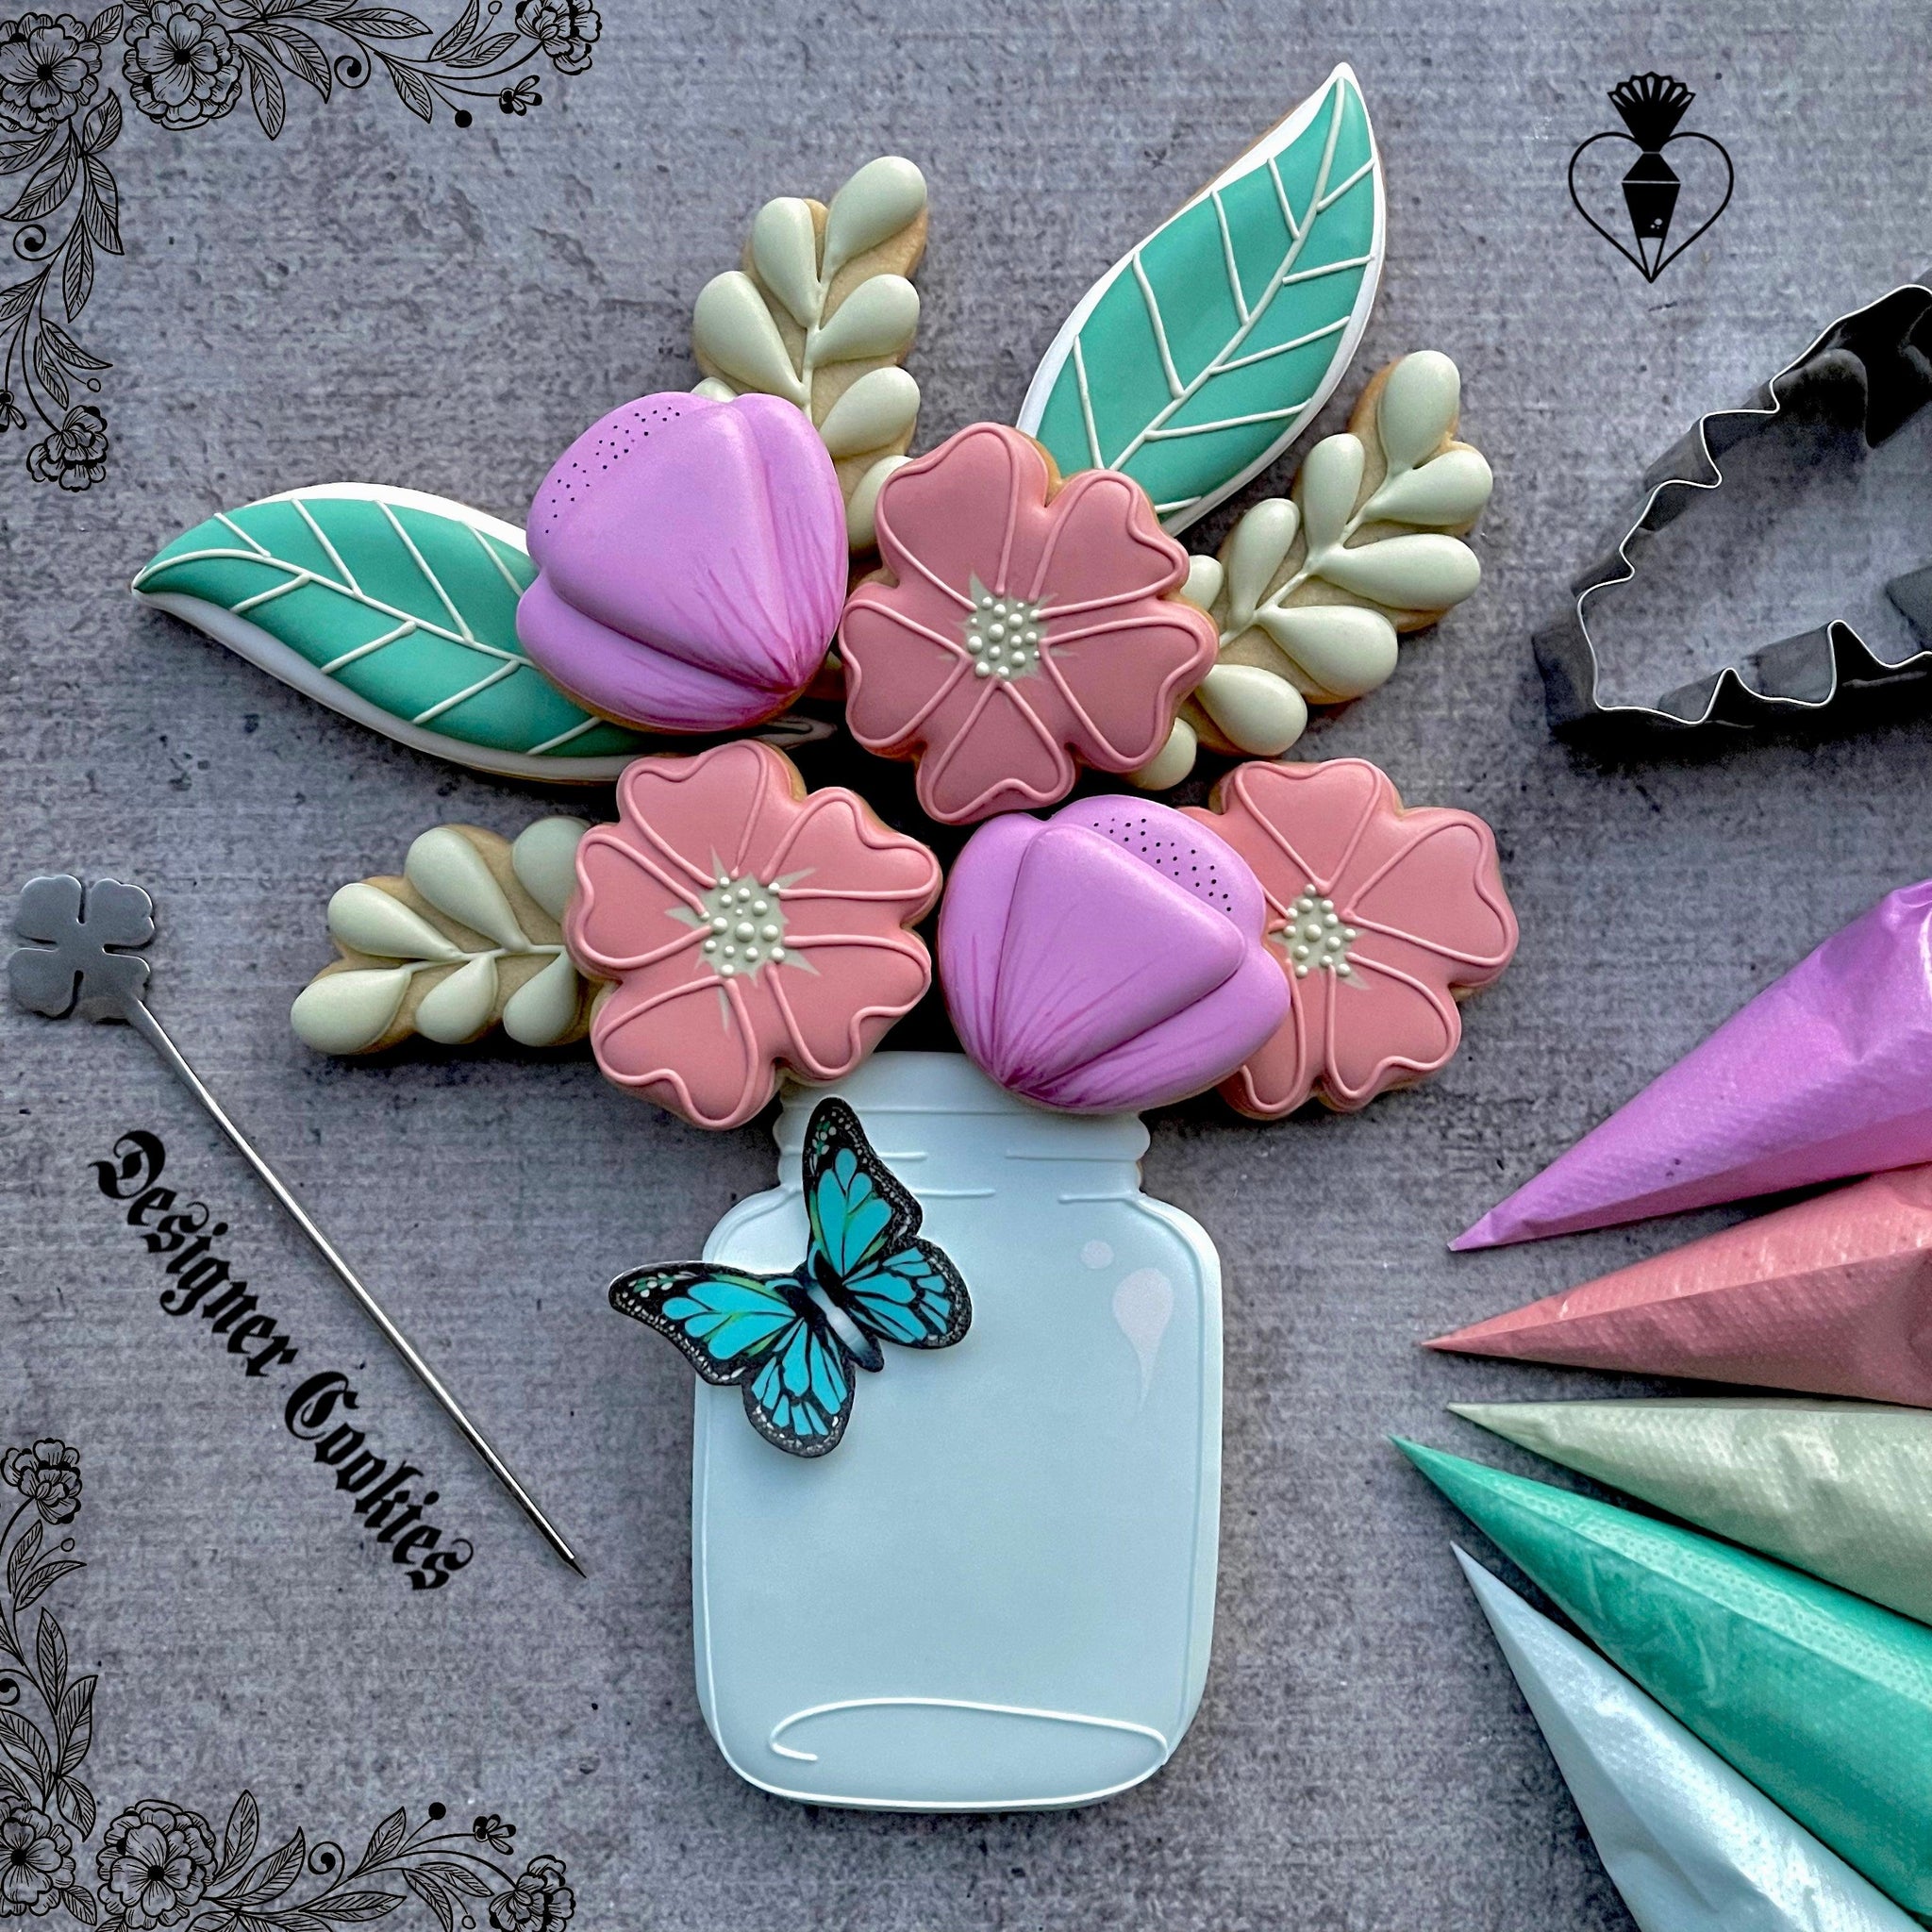 Florals for May // All-Levels Cookie Decorating Class - Designer Cookies ™ STUDIO